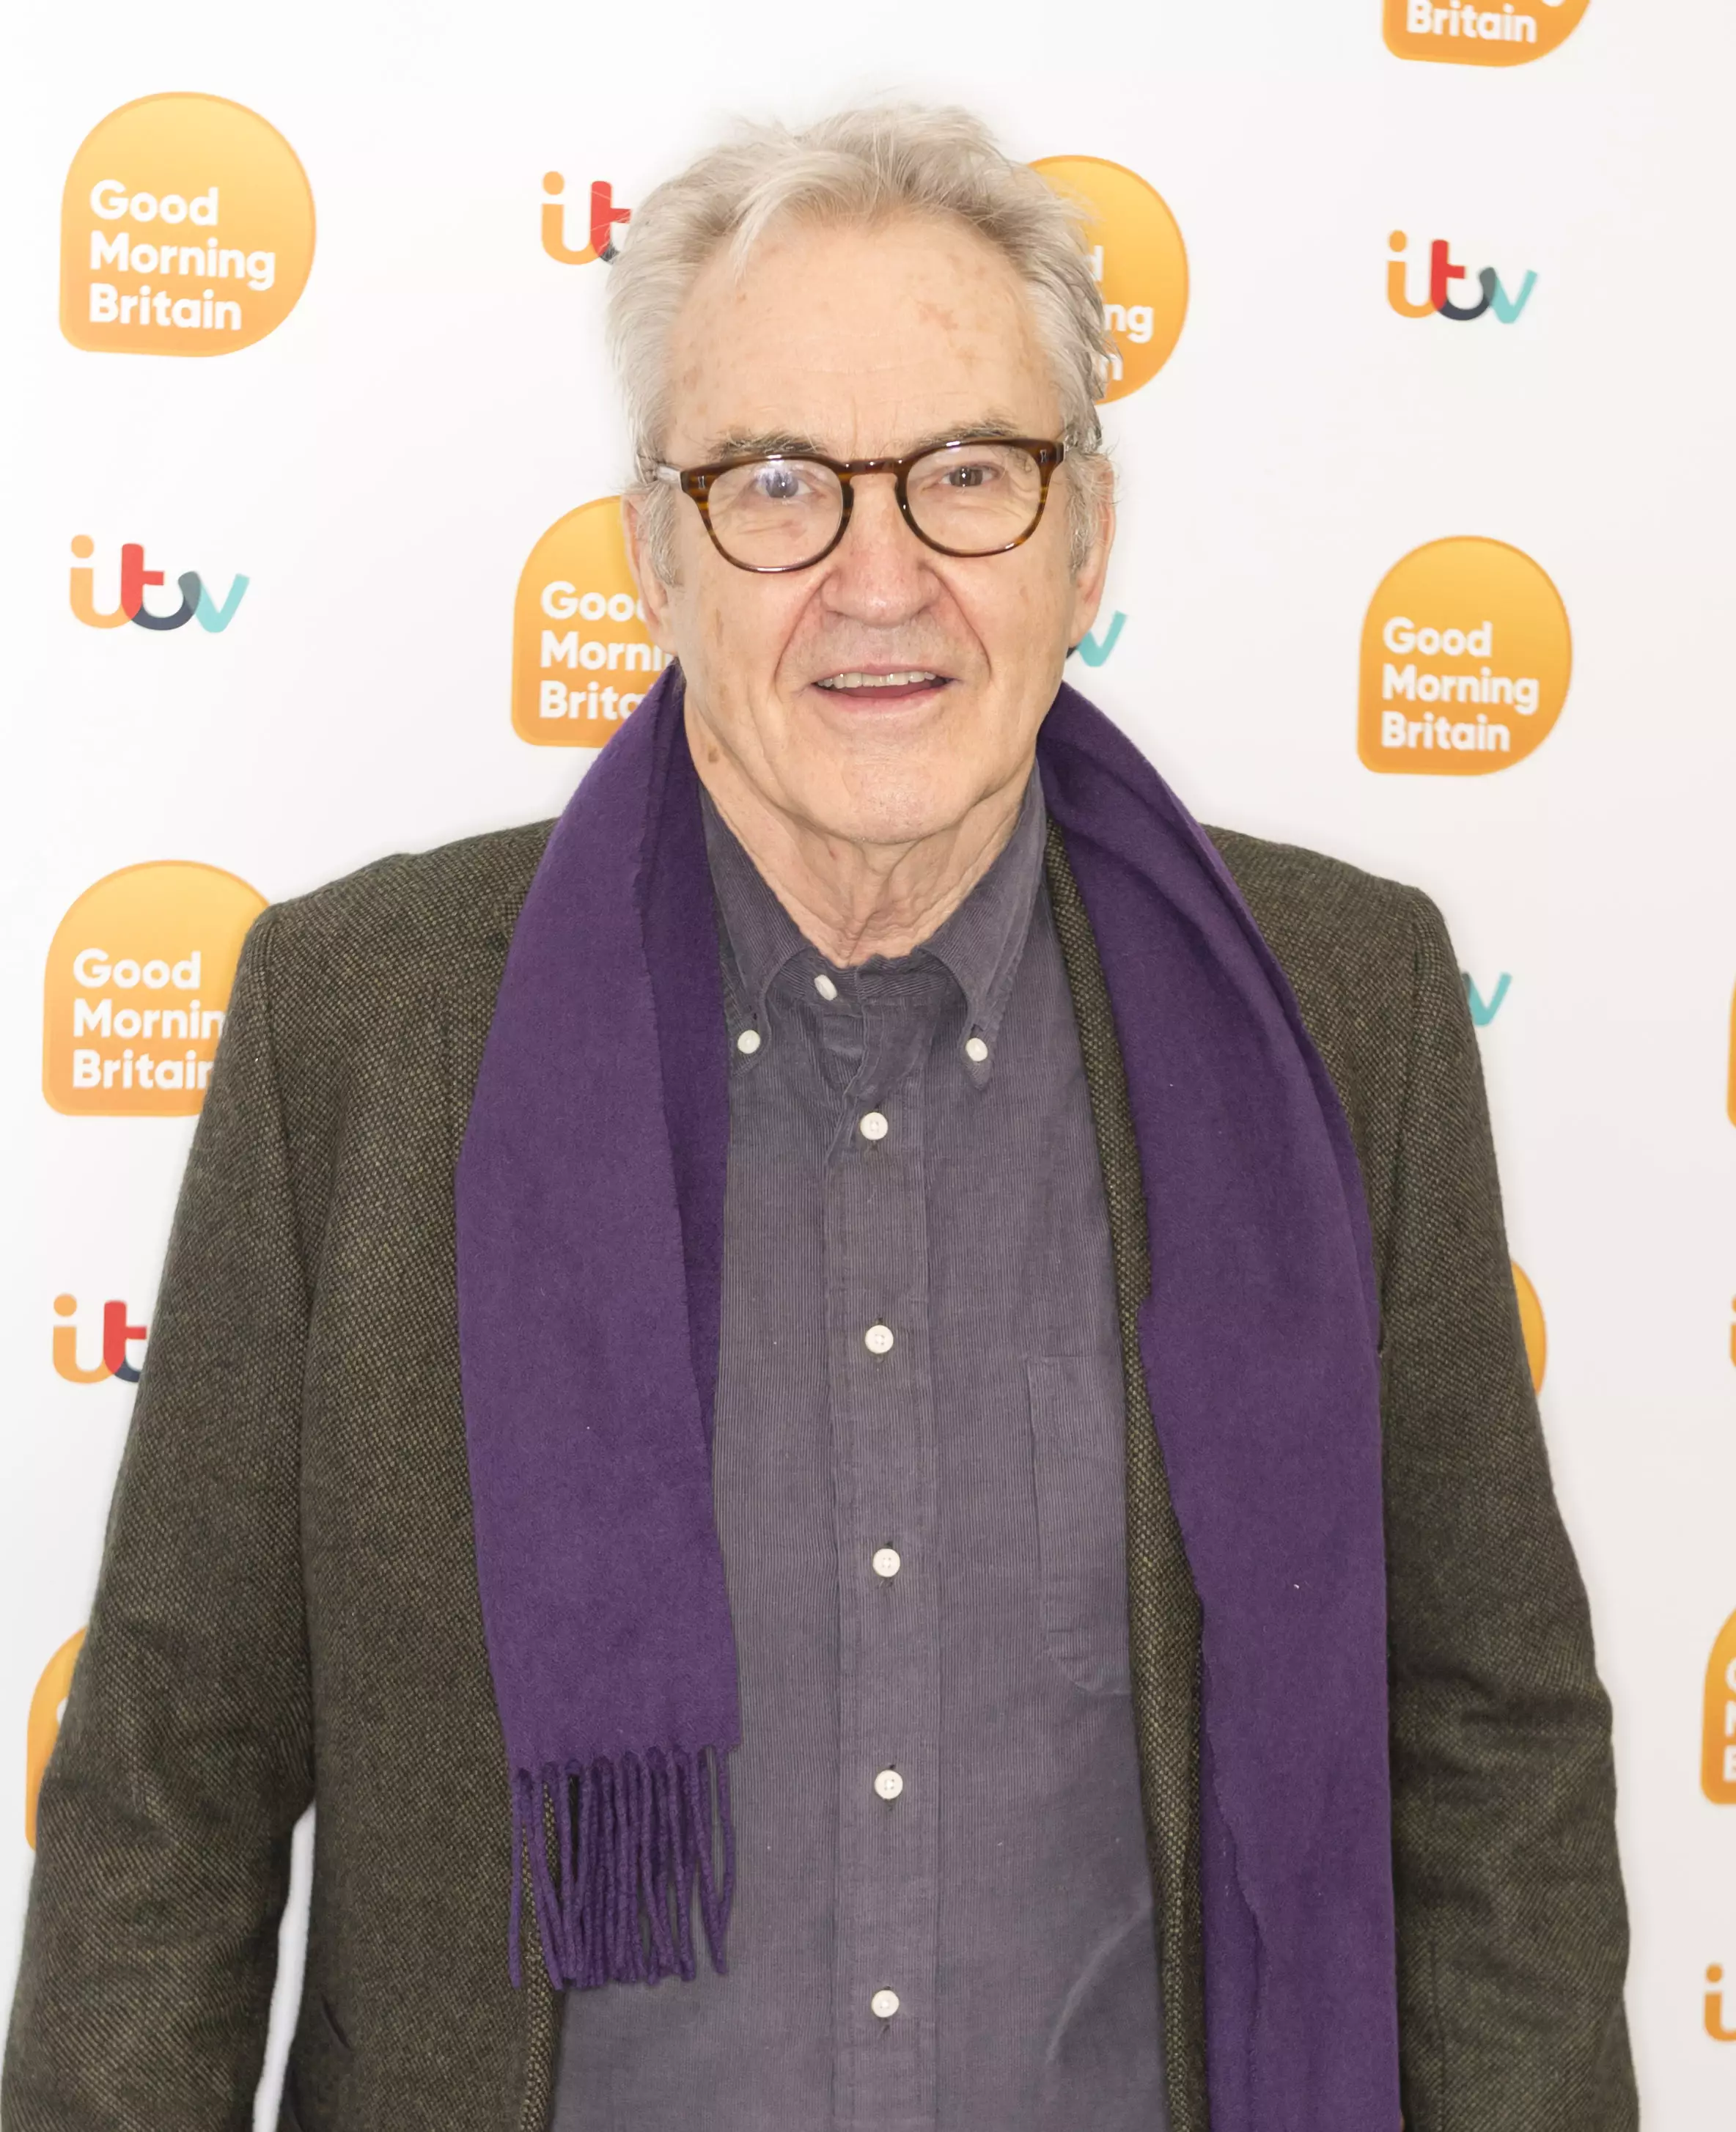 Larry Lamb hinted at more Gavin & Stacey episodes (